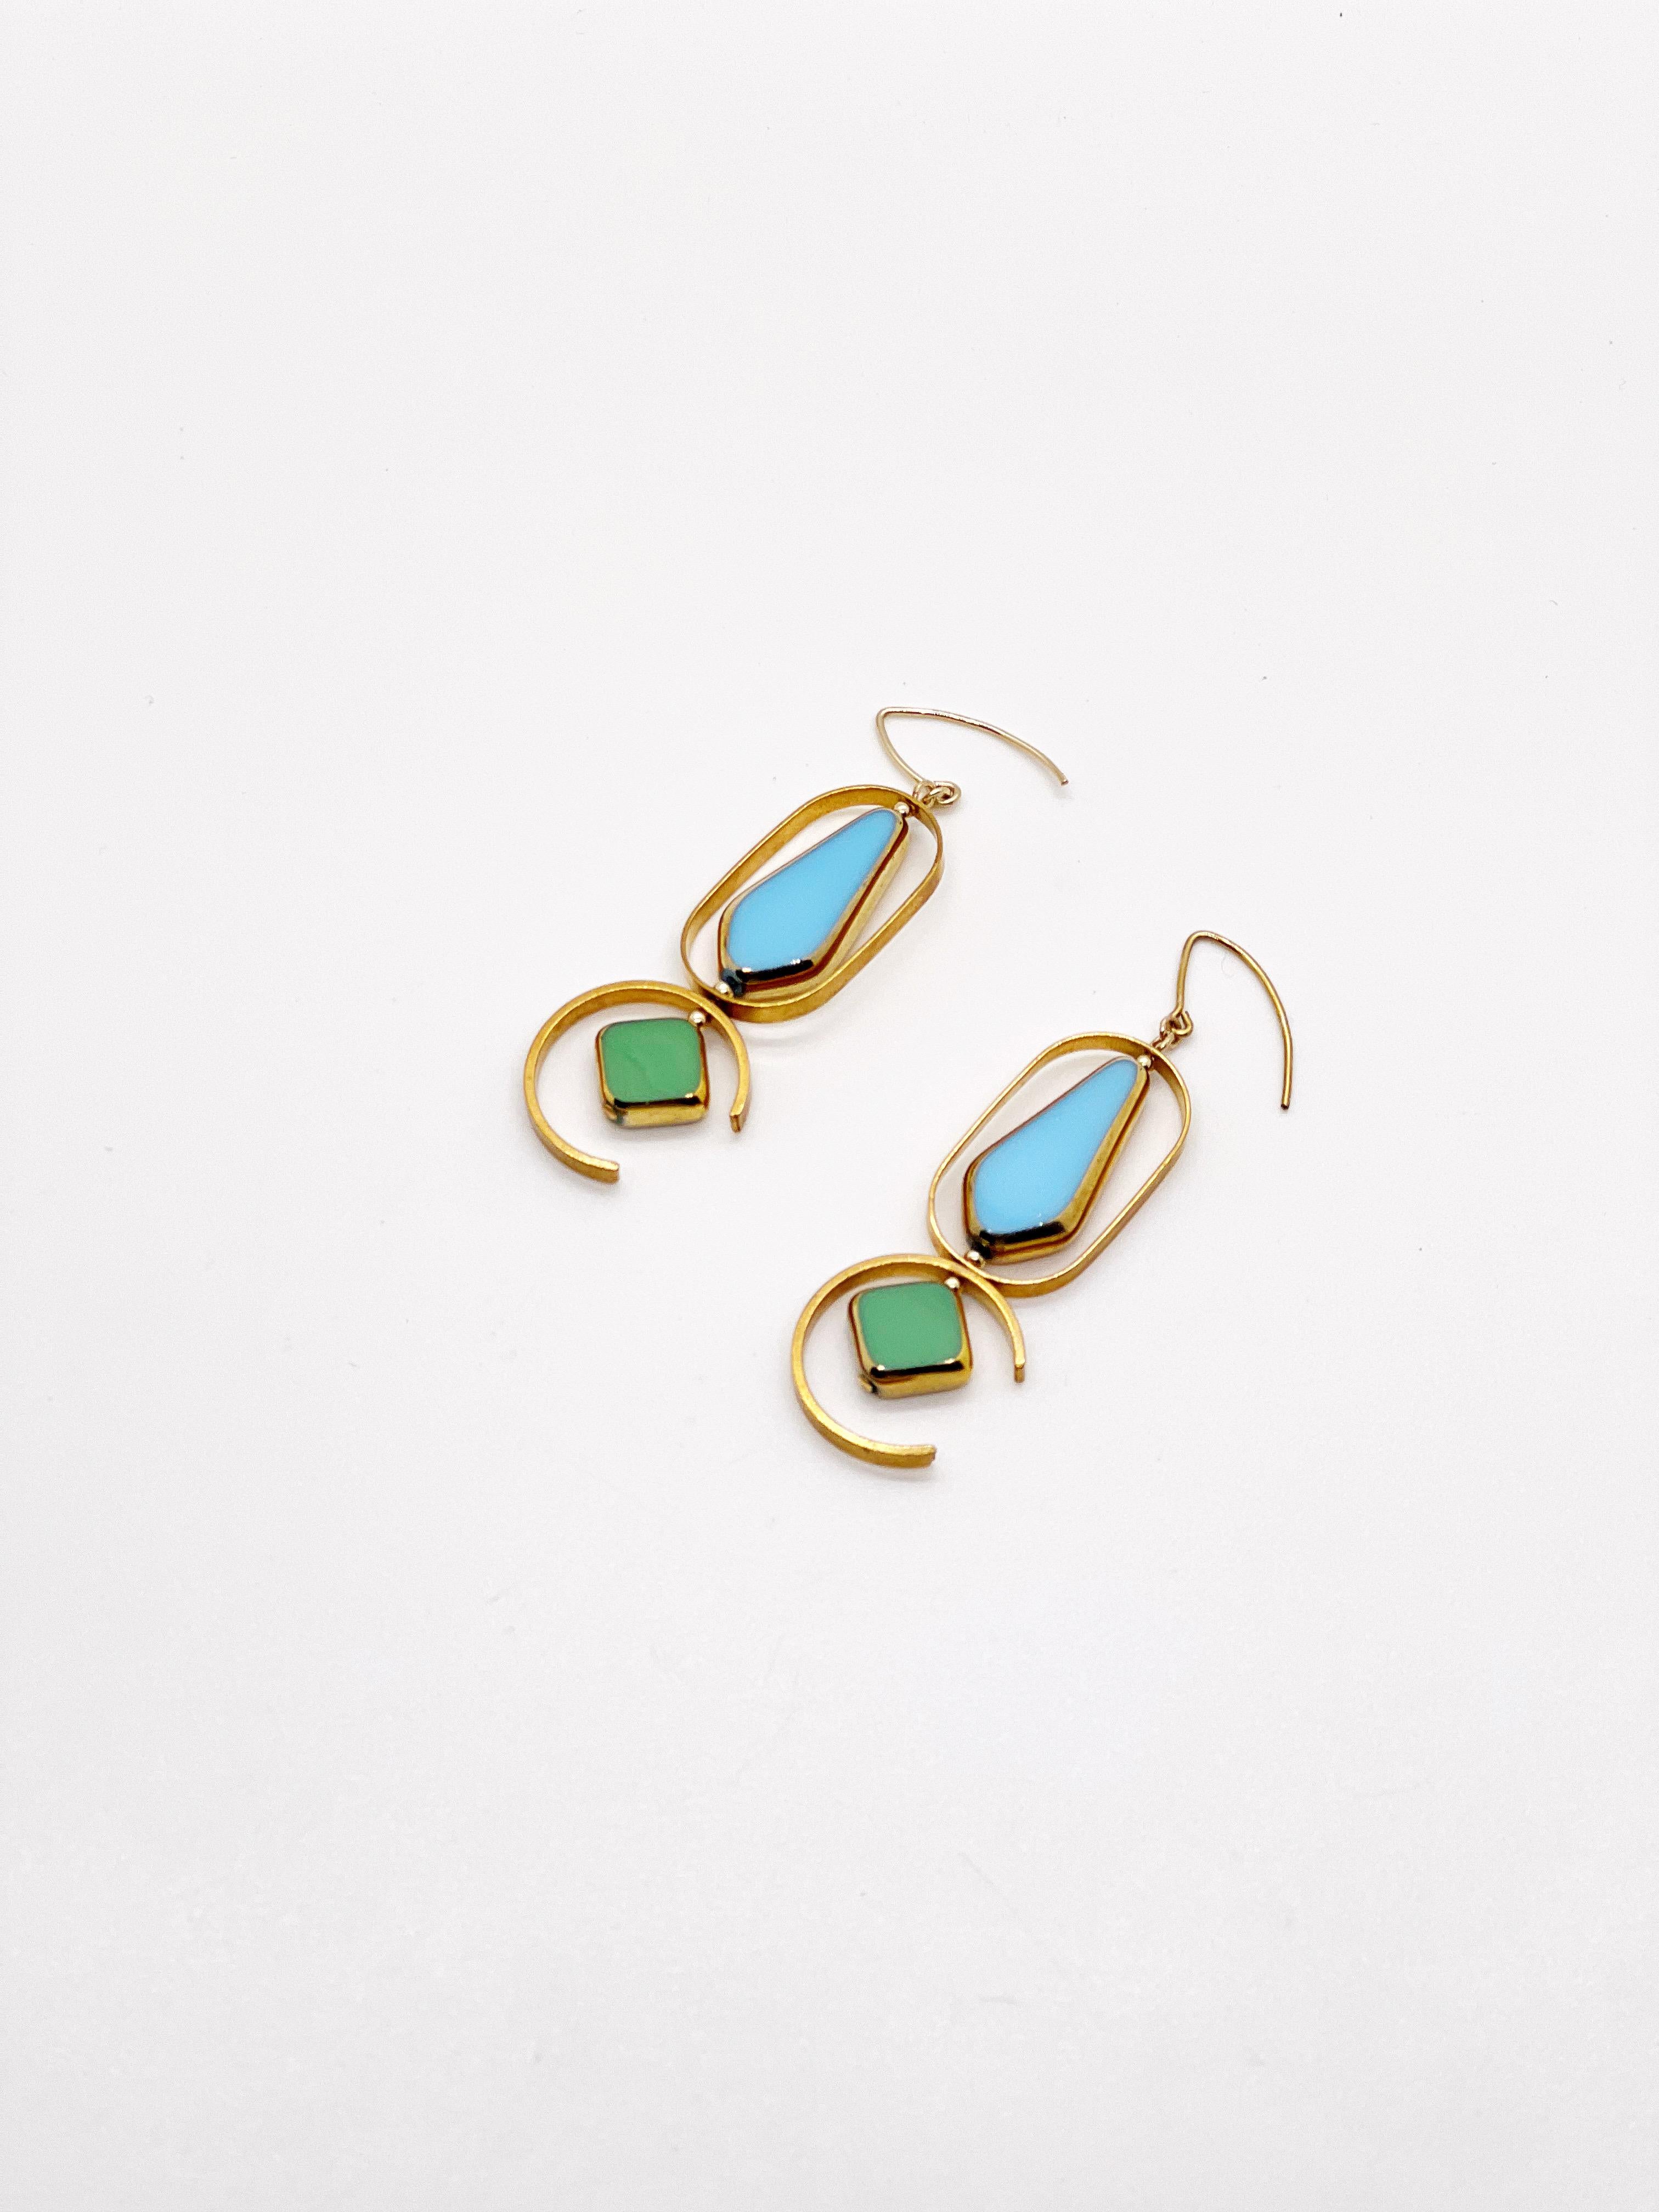 The earrings consist of large baby blue arrow and green diamond shaped beads. They are new old stock vintage German glass beads that are framed with 24K gold. The beads were hand pressed during the 1920s-1960s. No two beads are exactly alike. These